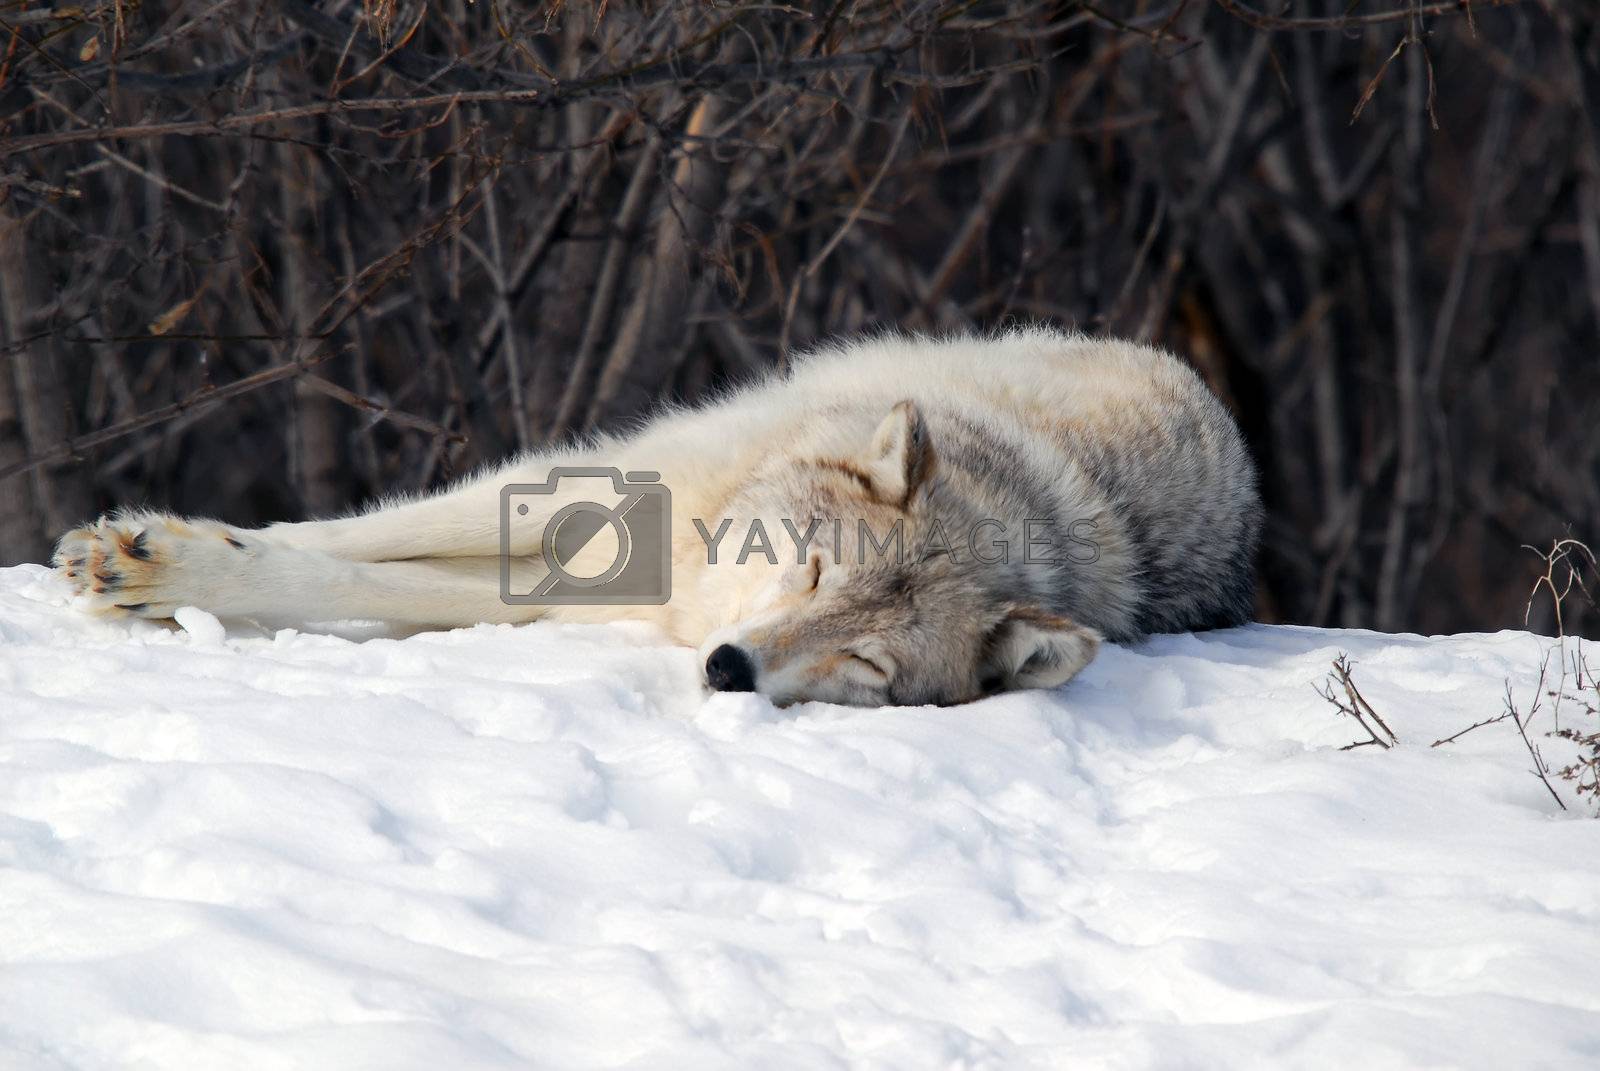 Royalty free image of Gray Wolf by nialat